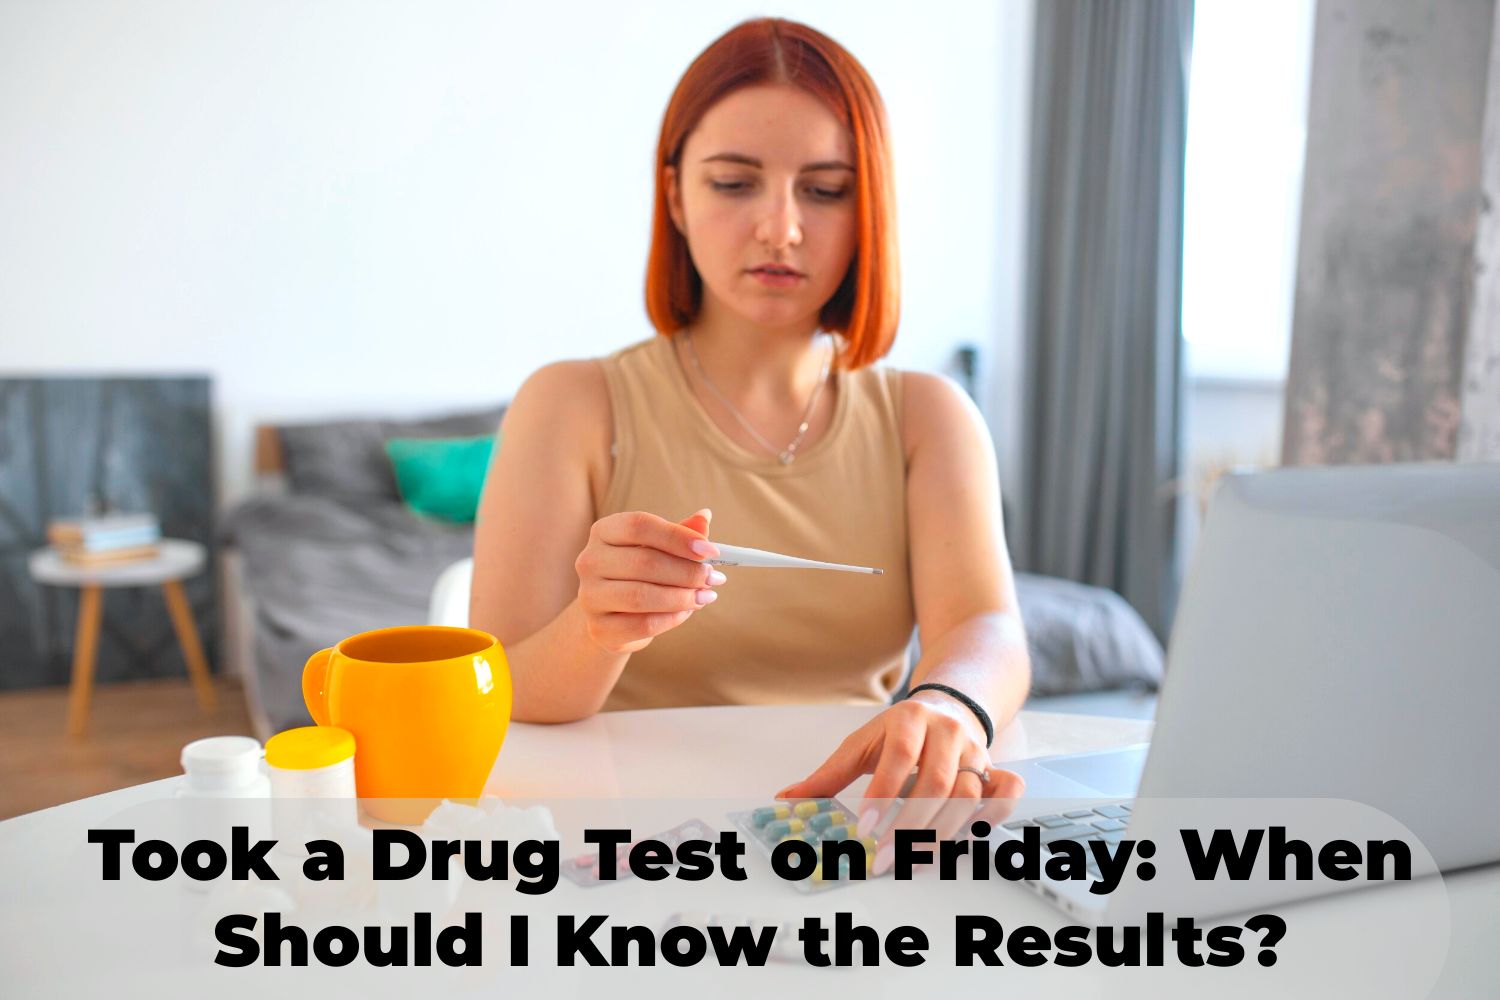 Took a Drug Test on Friday When Should I Know the Results